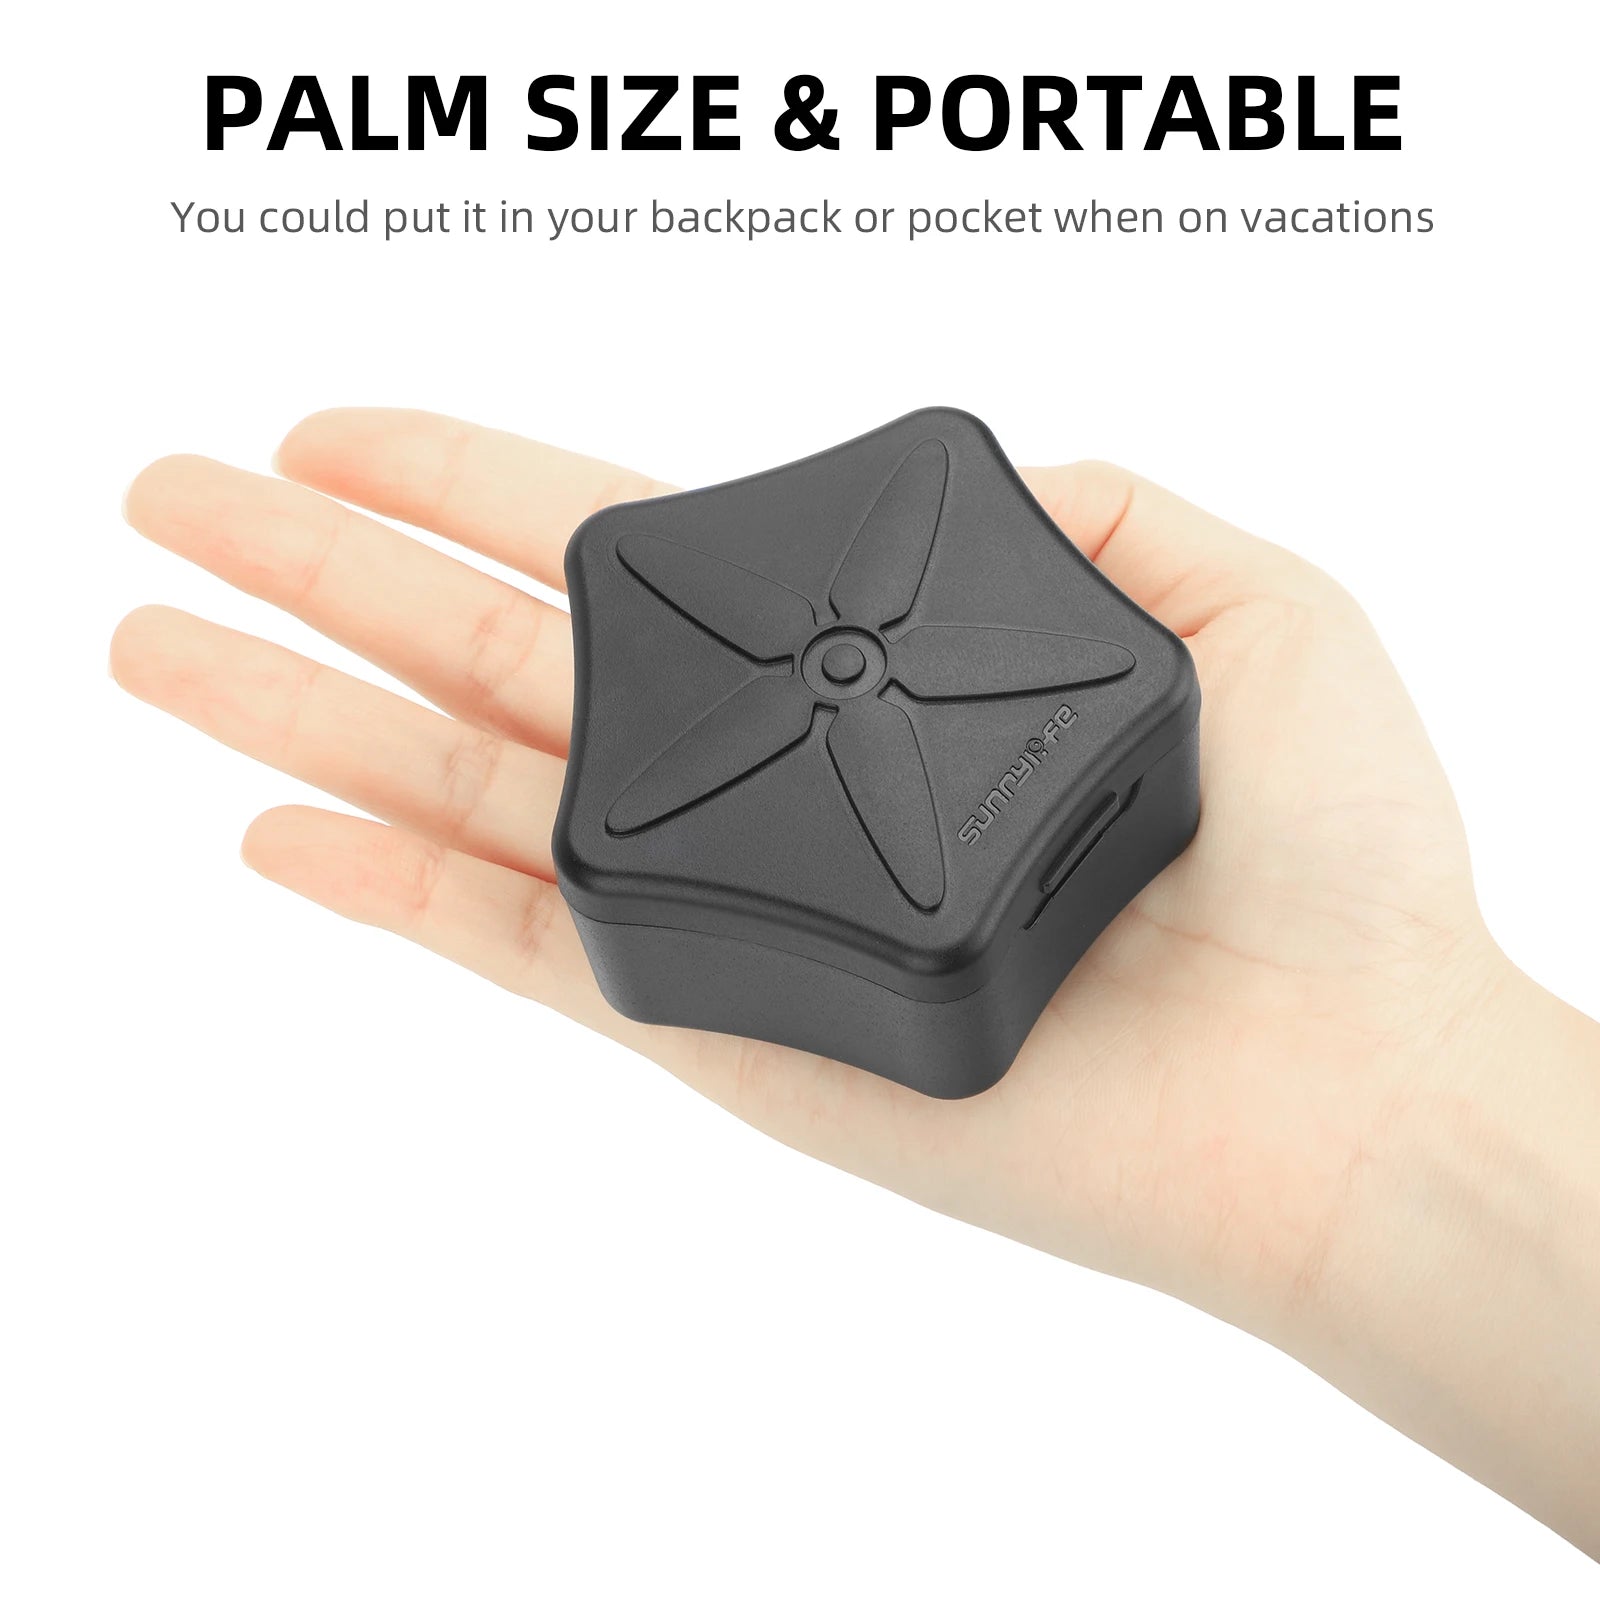 PALM SIZE & PORTABLE You could put it in your backpack or pocket when